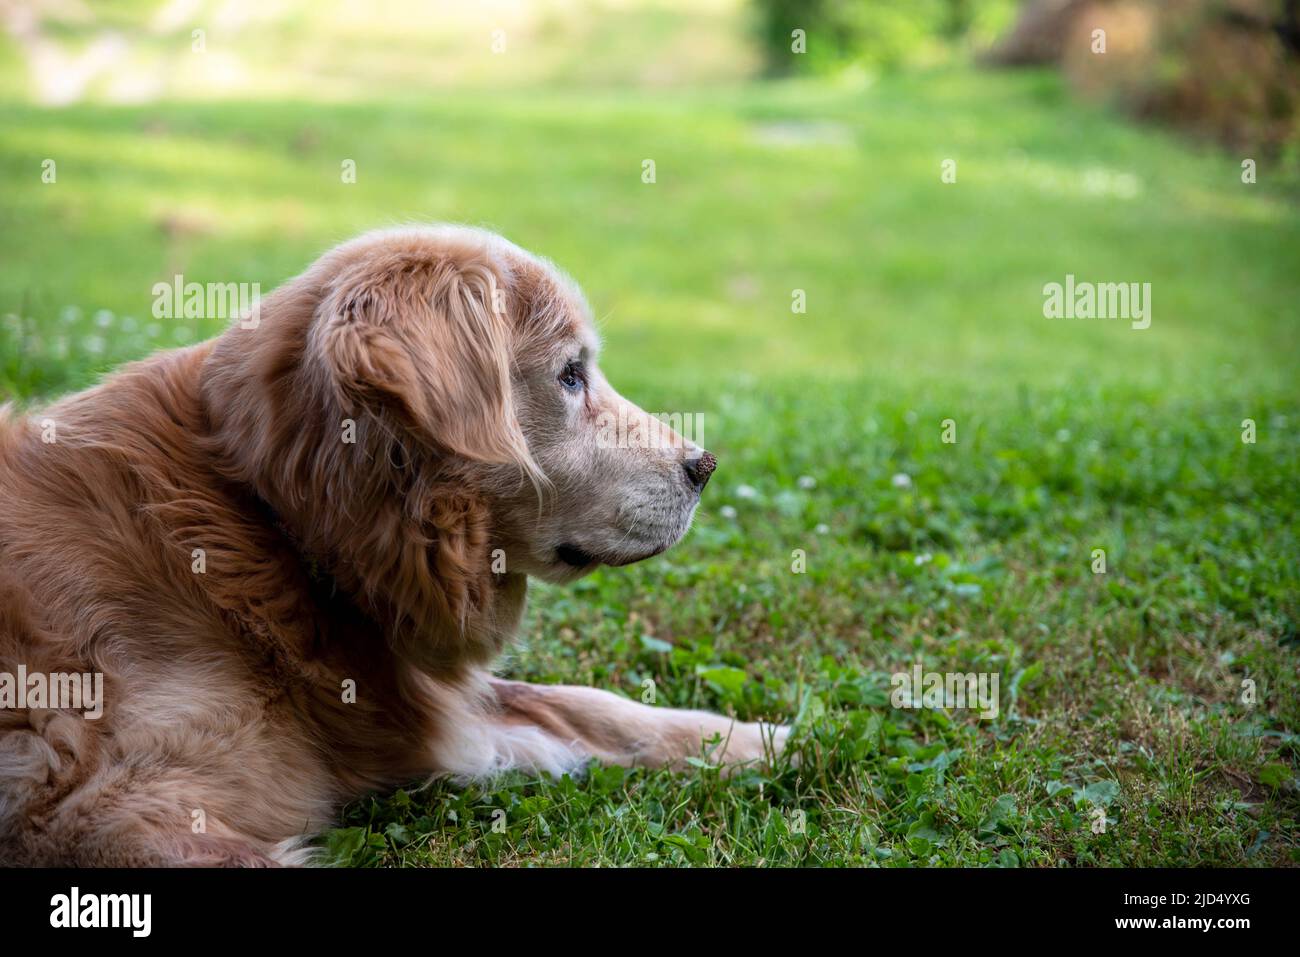 Old friendly golden retriever breed farm dog rests in the grass with agricultural field nature background. Shot in natural sunlight with no people and Stock Photo